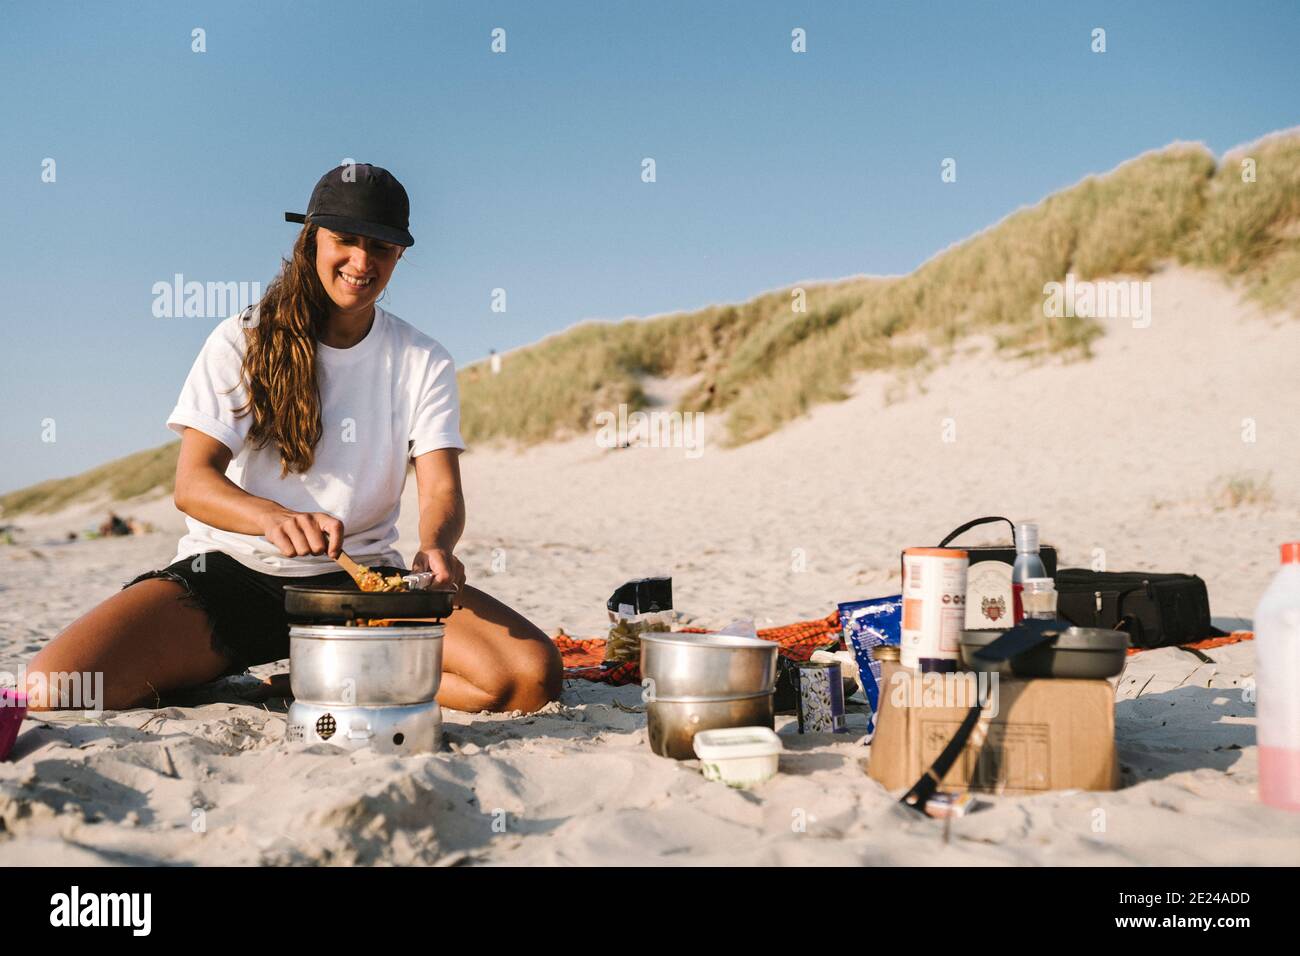 Smiling woman cooking on beach Stock Photo